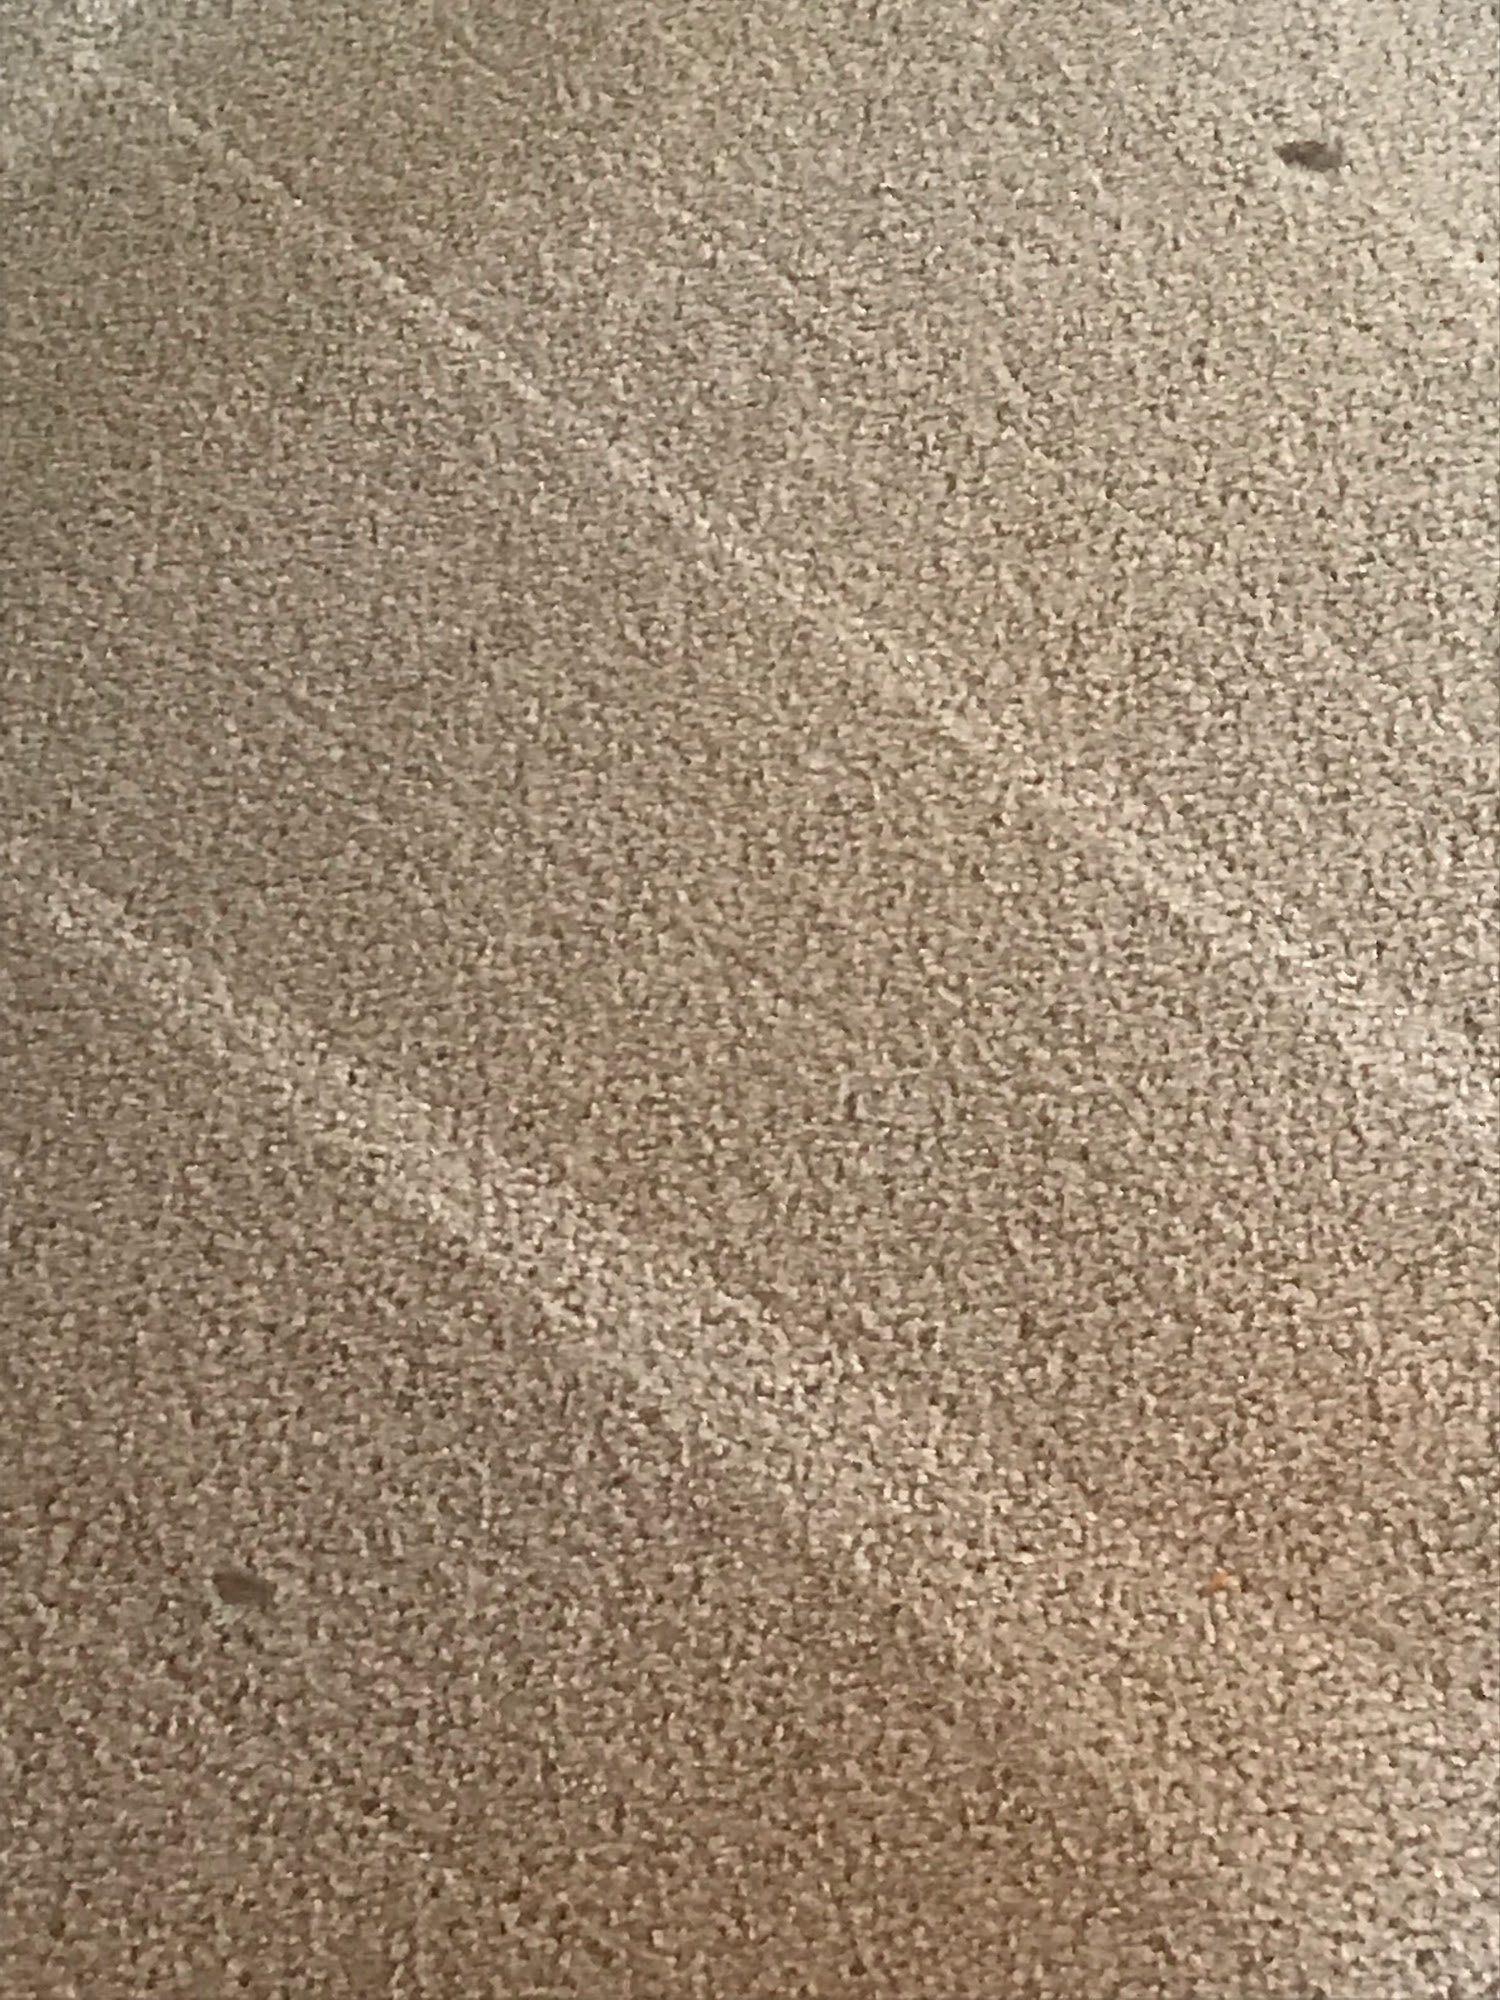 Dynamic Carpet Cleaning & Water Extraction